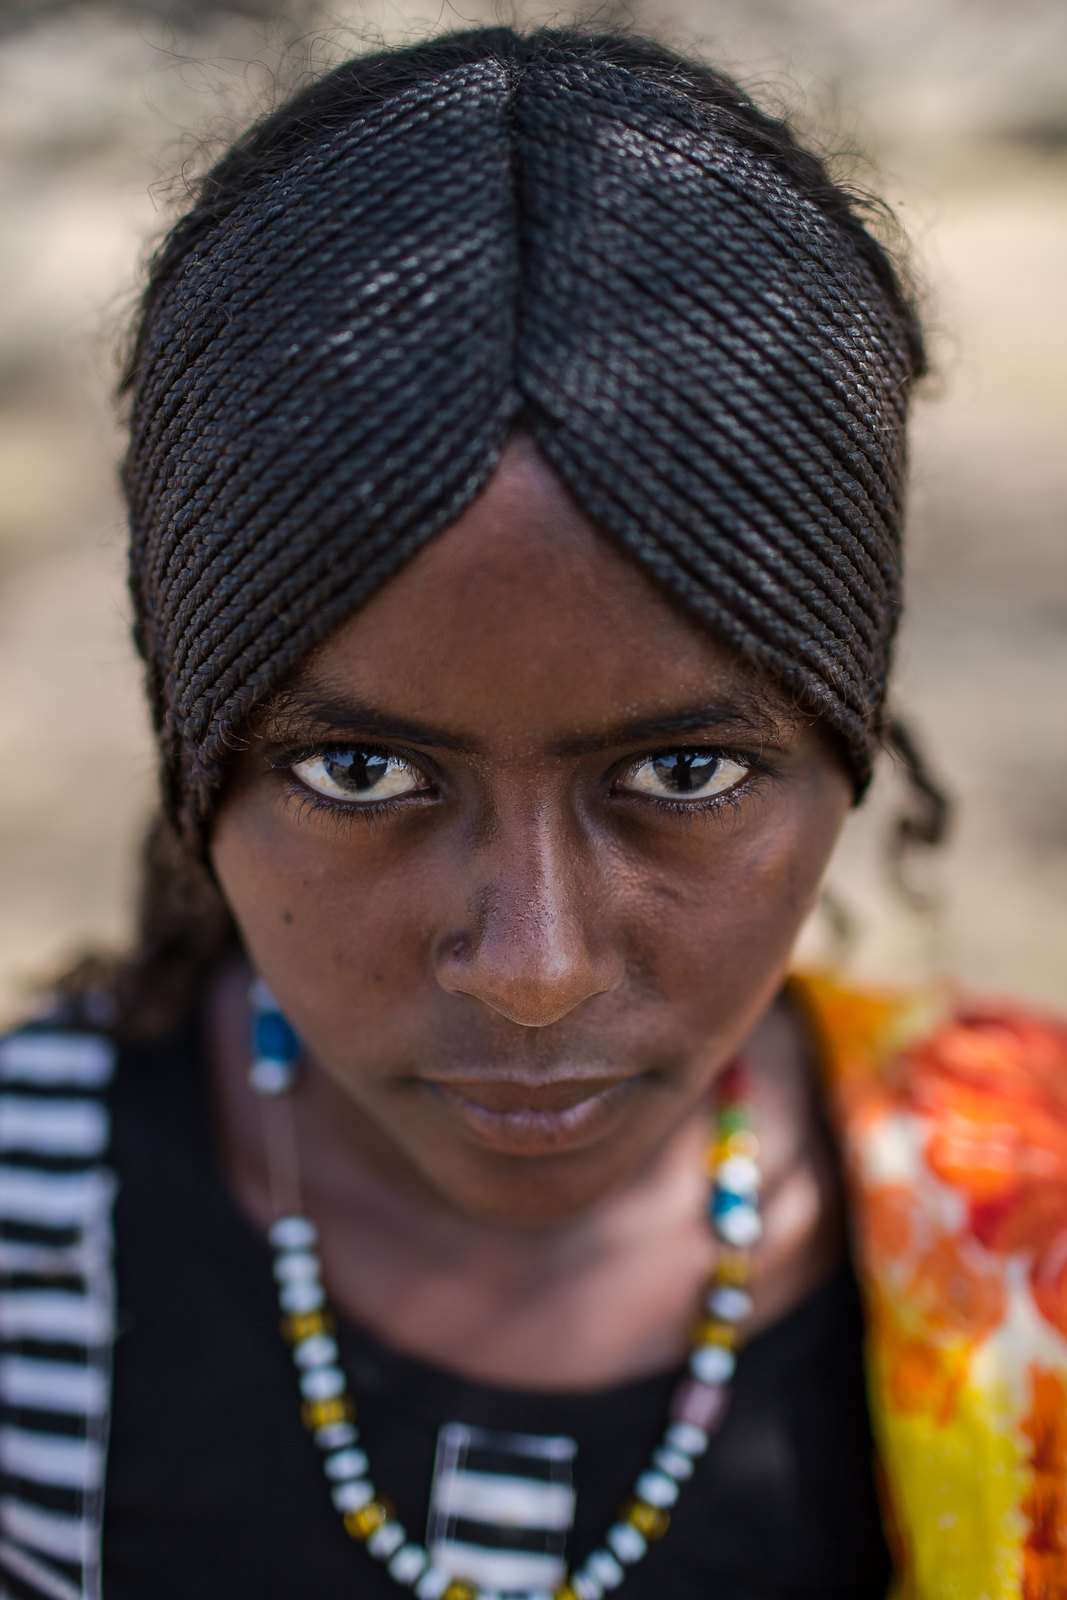 Portrait of an Afar tribe girl with braided hair and 